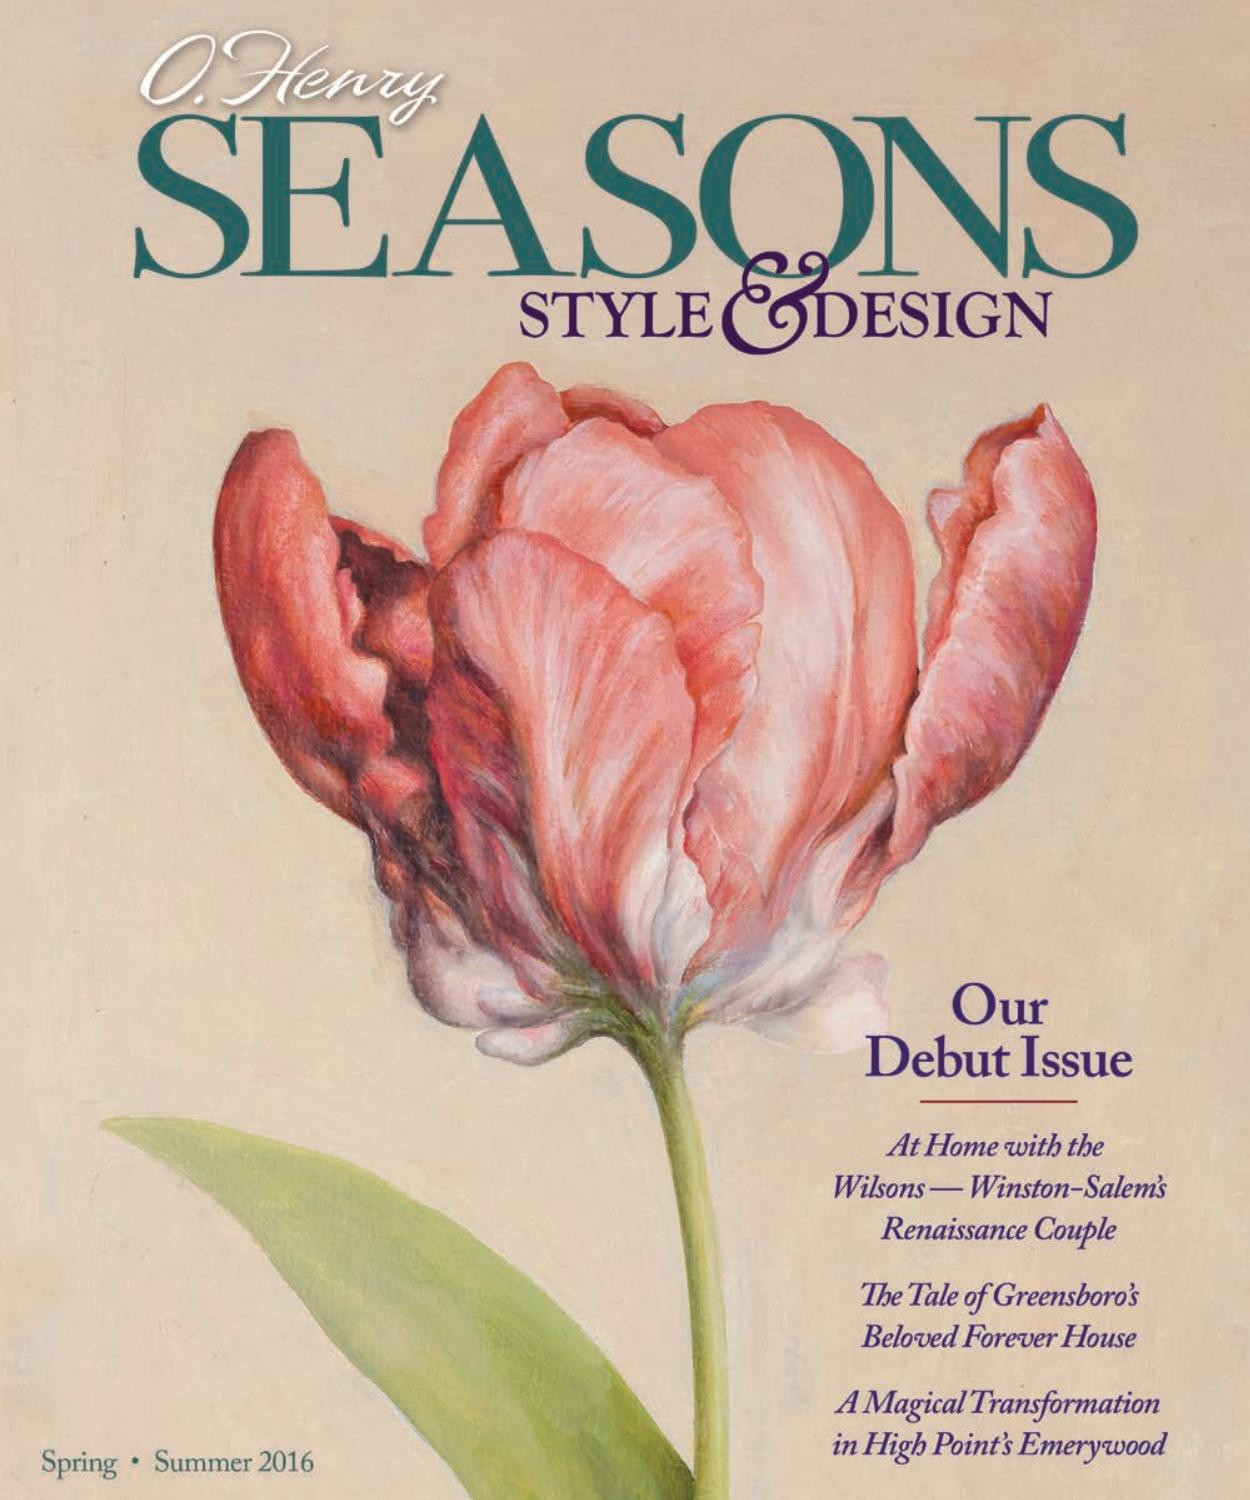 12 Great Gorham Tulip Bouquet Vase 2024 free download gorham tulip bouquet vase of o henry seasons style design by o henry magazine issuu within page 1